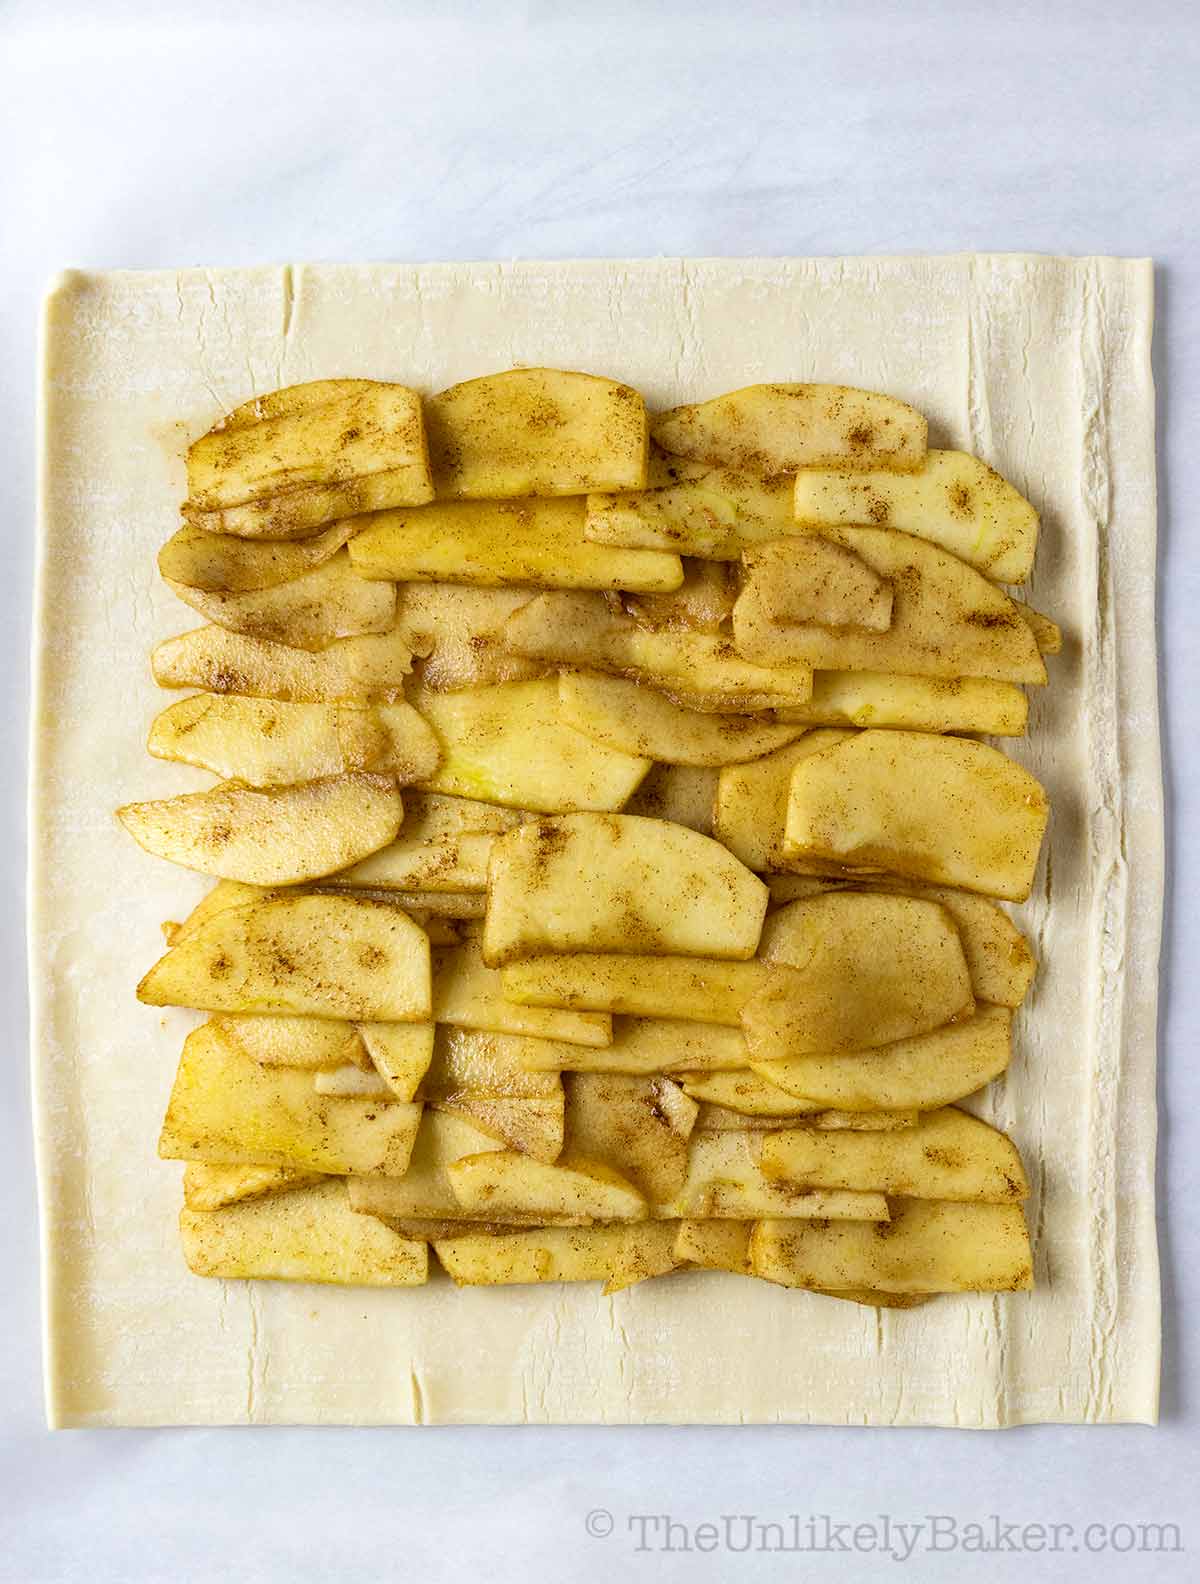 Place apple slices on puff pastry